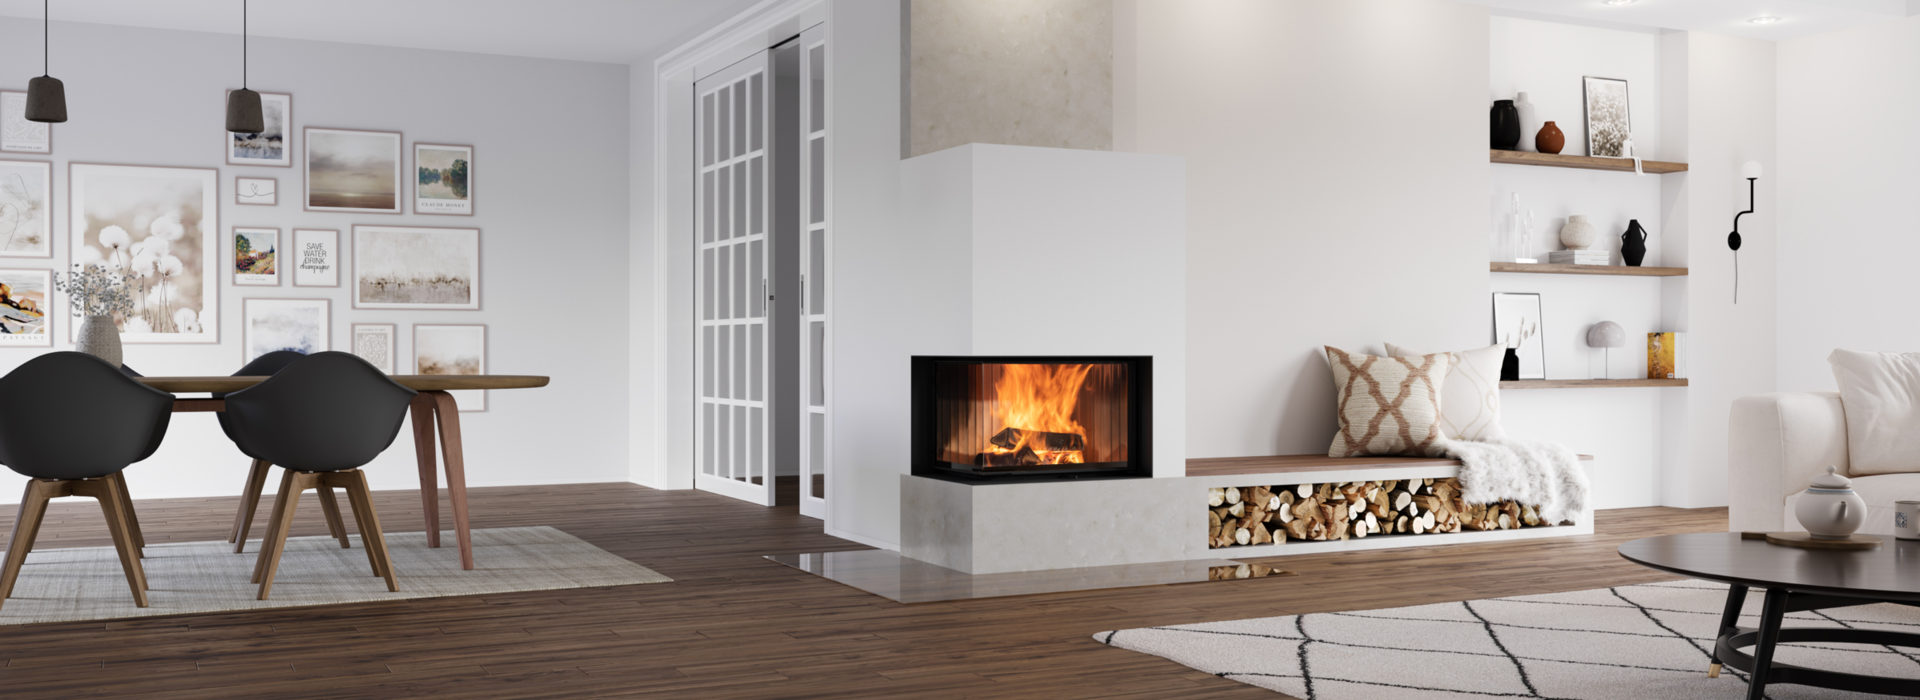 Image Of Square Cast Iron Woodburner Contemporary Log Wood Burning Stove  Fireplace Mantle With Orange Fire Flames Burning And Generating Heat To  Warm Up Room Instead Of Gas Boiler Central Heating Modern